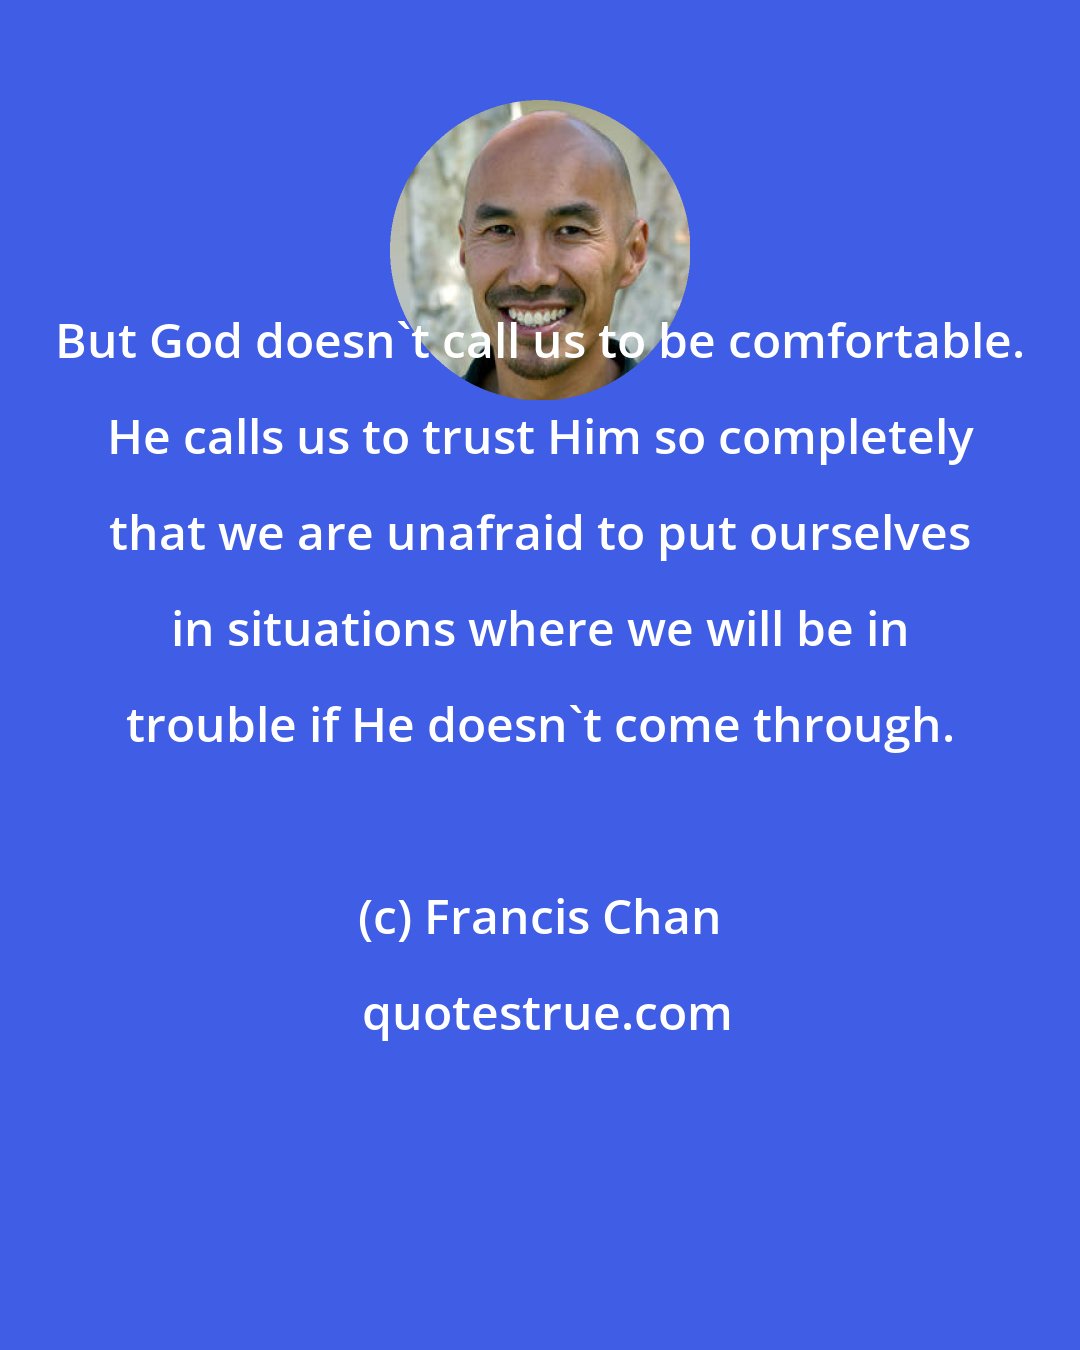 Francis Chan: But God doesn't call us to be comfortable. He calls us to trust Him so completely that we are unafraid to put ourselves in situations where we will be in trouble if He doesn't come through.